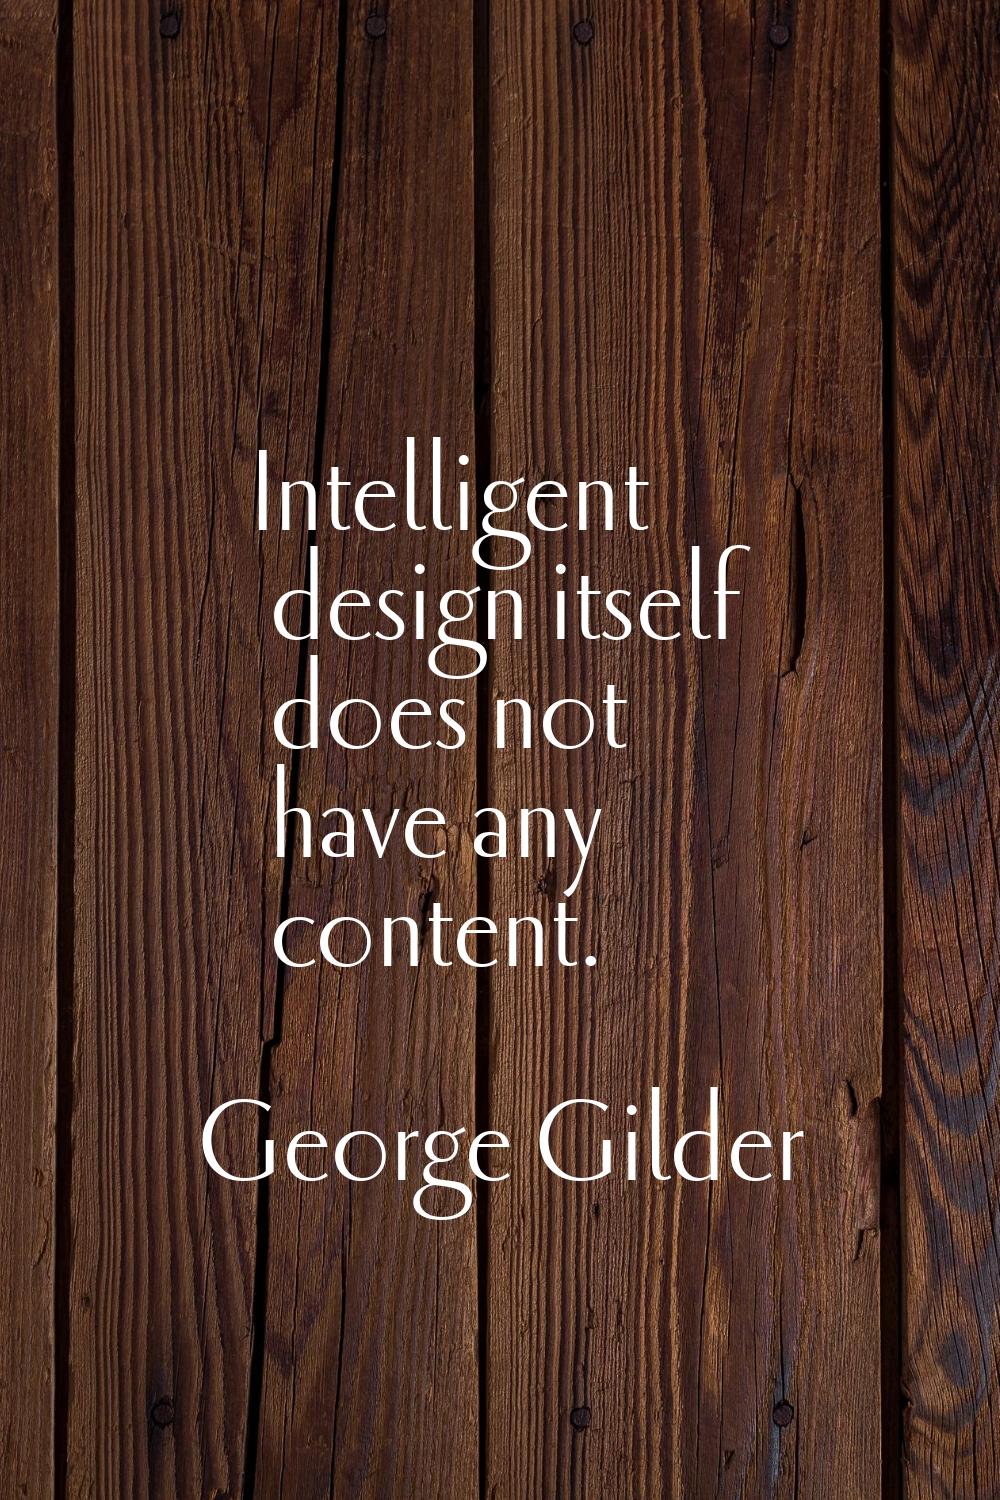 Intelligent design itself does not have any content.